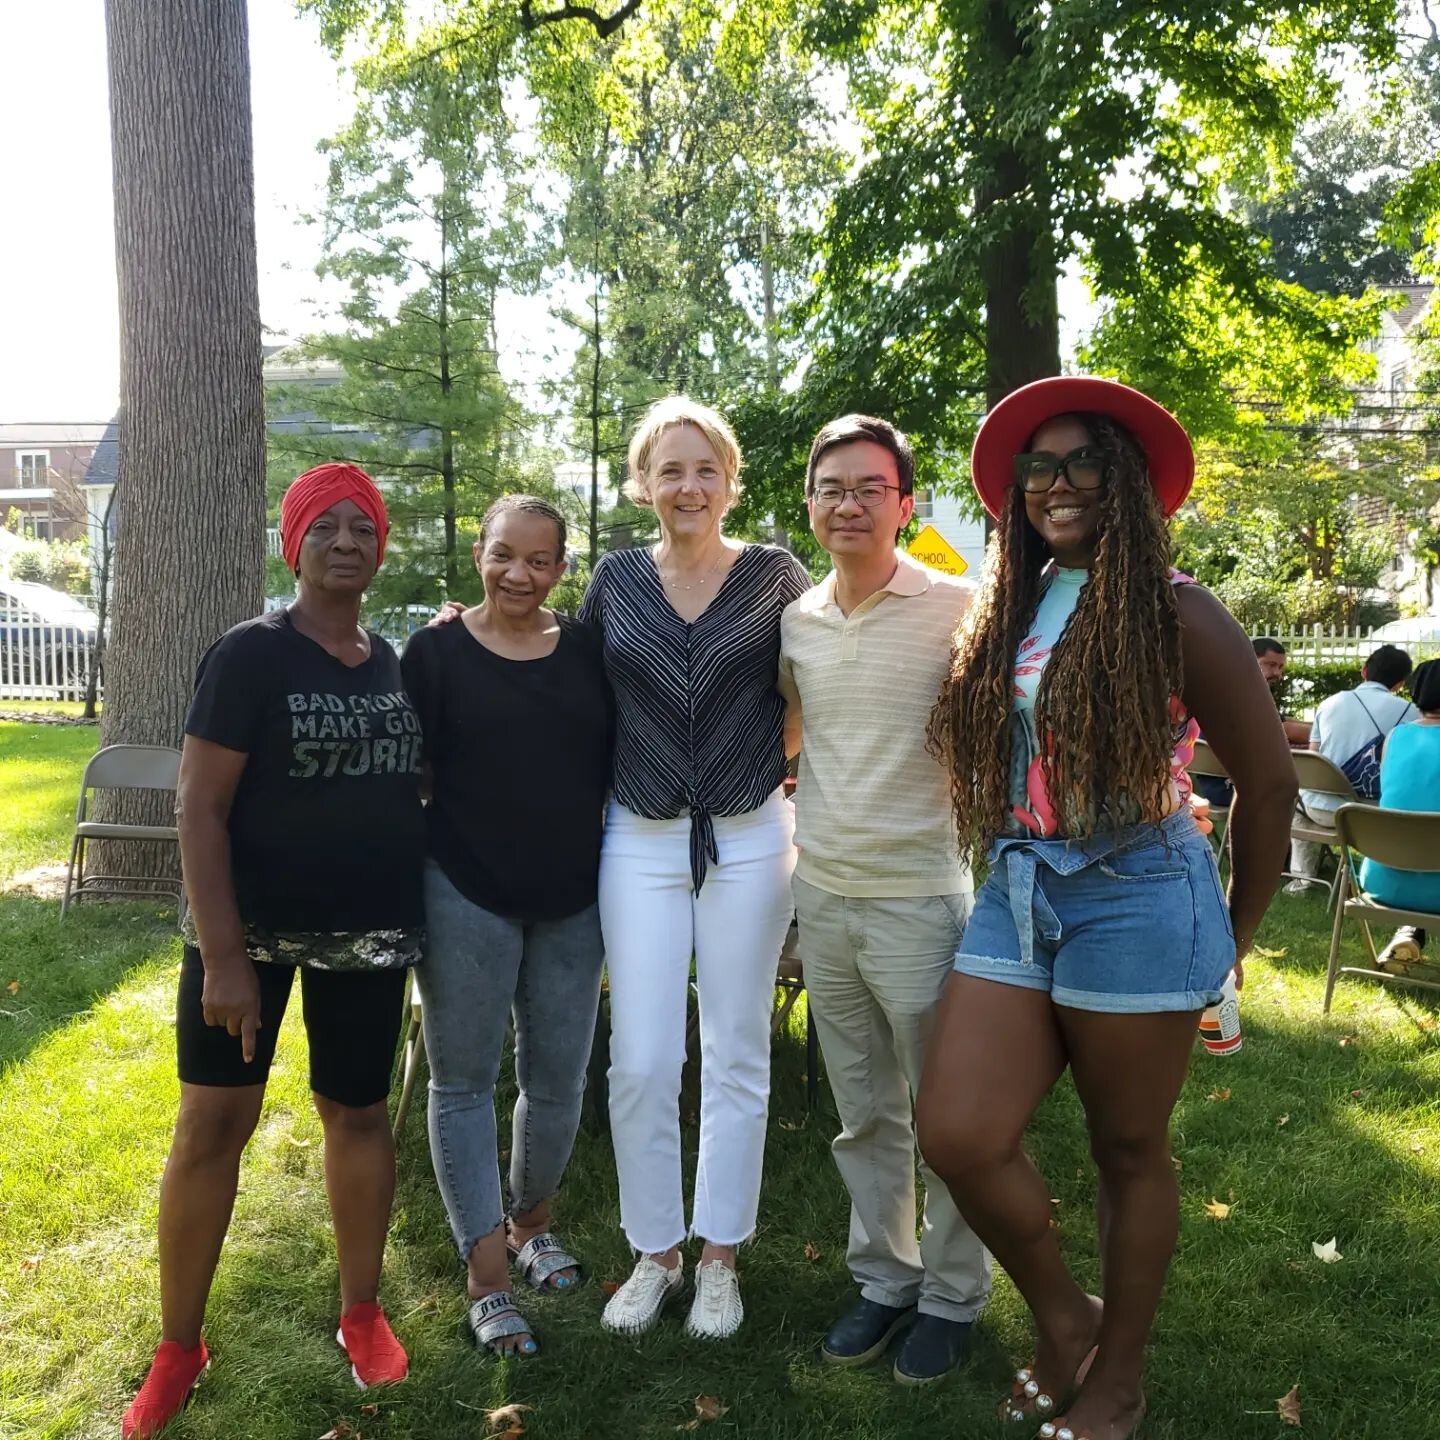 Spinney Hill Community BBQ was a huge success!

Thank you so much to the event organizers for putting it on, and offering a space for the community to gather together. It was insightful to meet residents and hear their concerns about our district. As